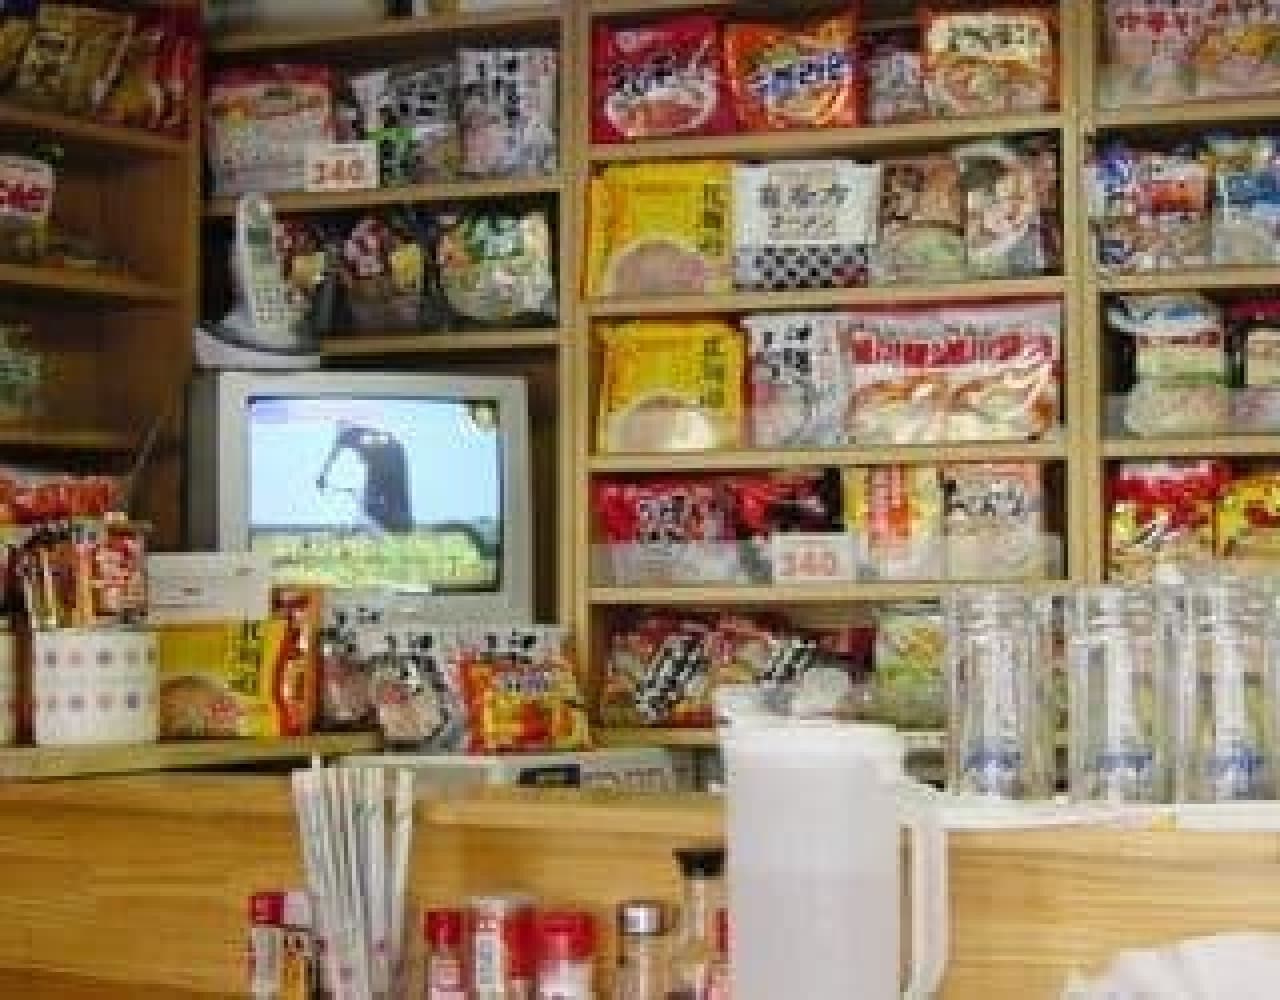 It seems that there are more than 200 types of instant noodles handled in the "Sakura" store.